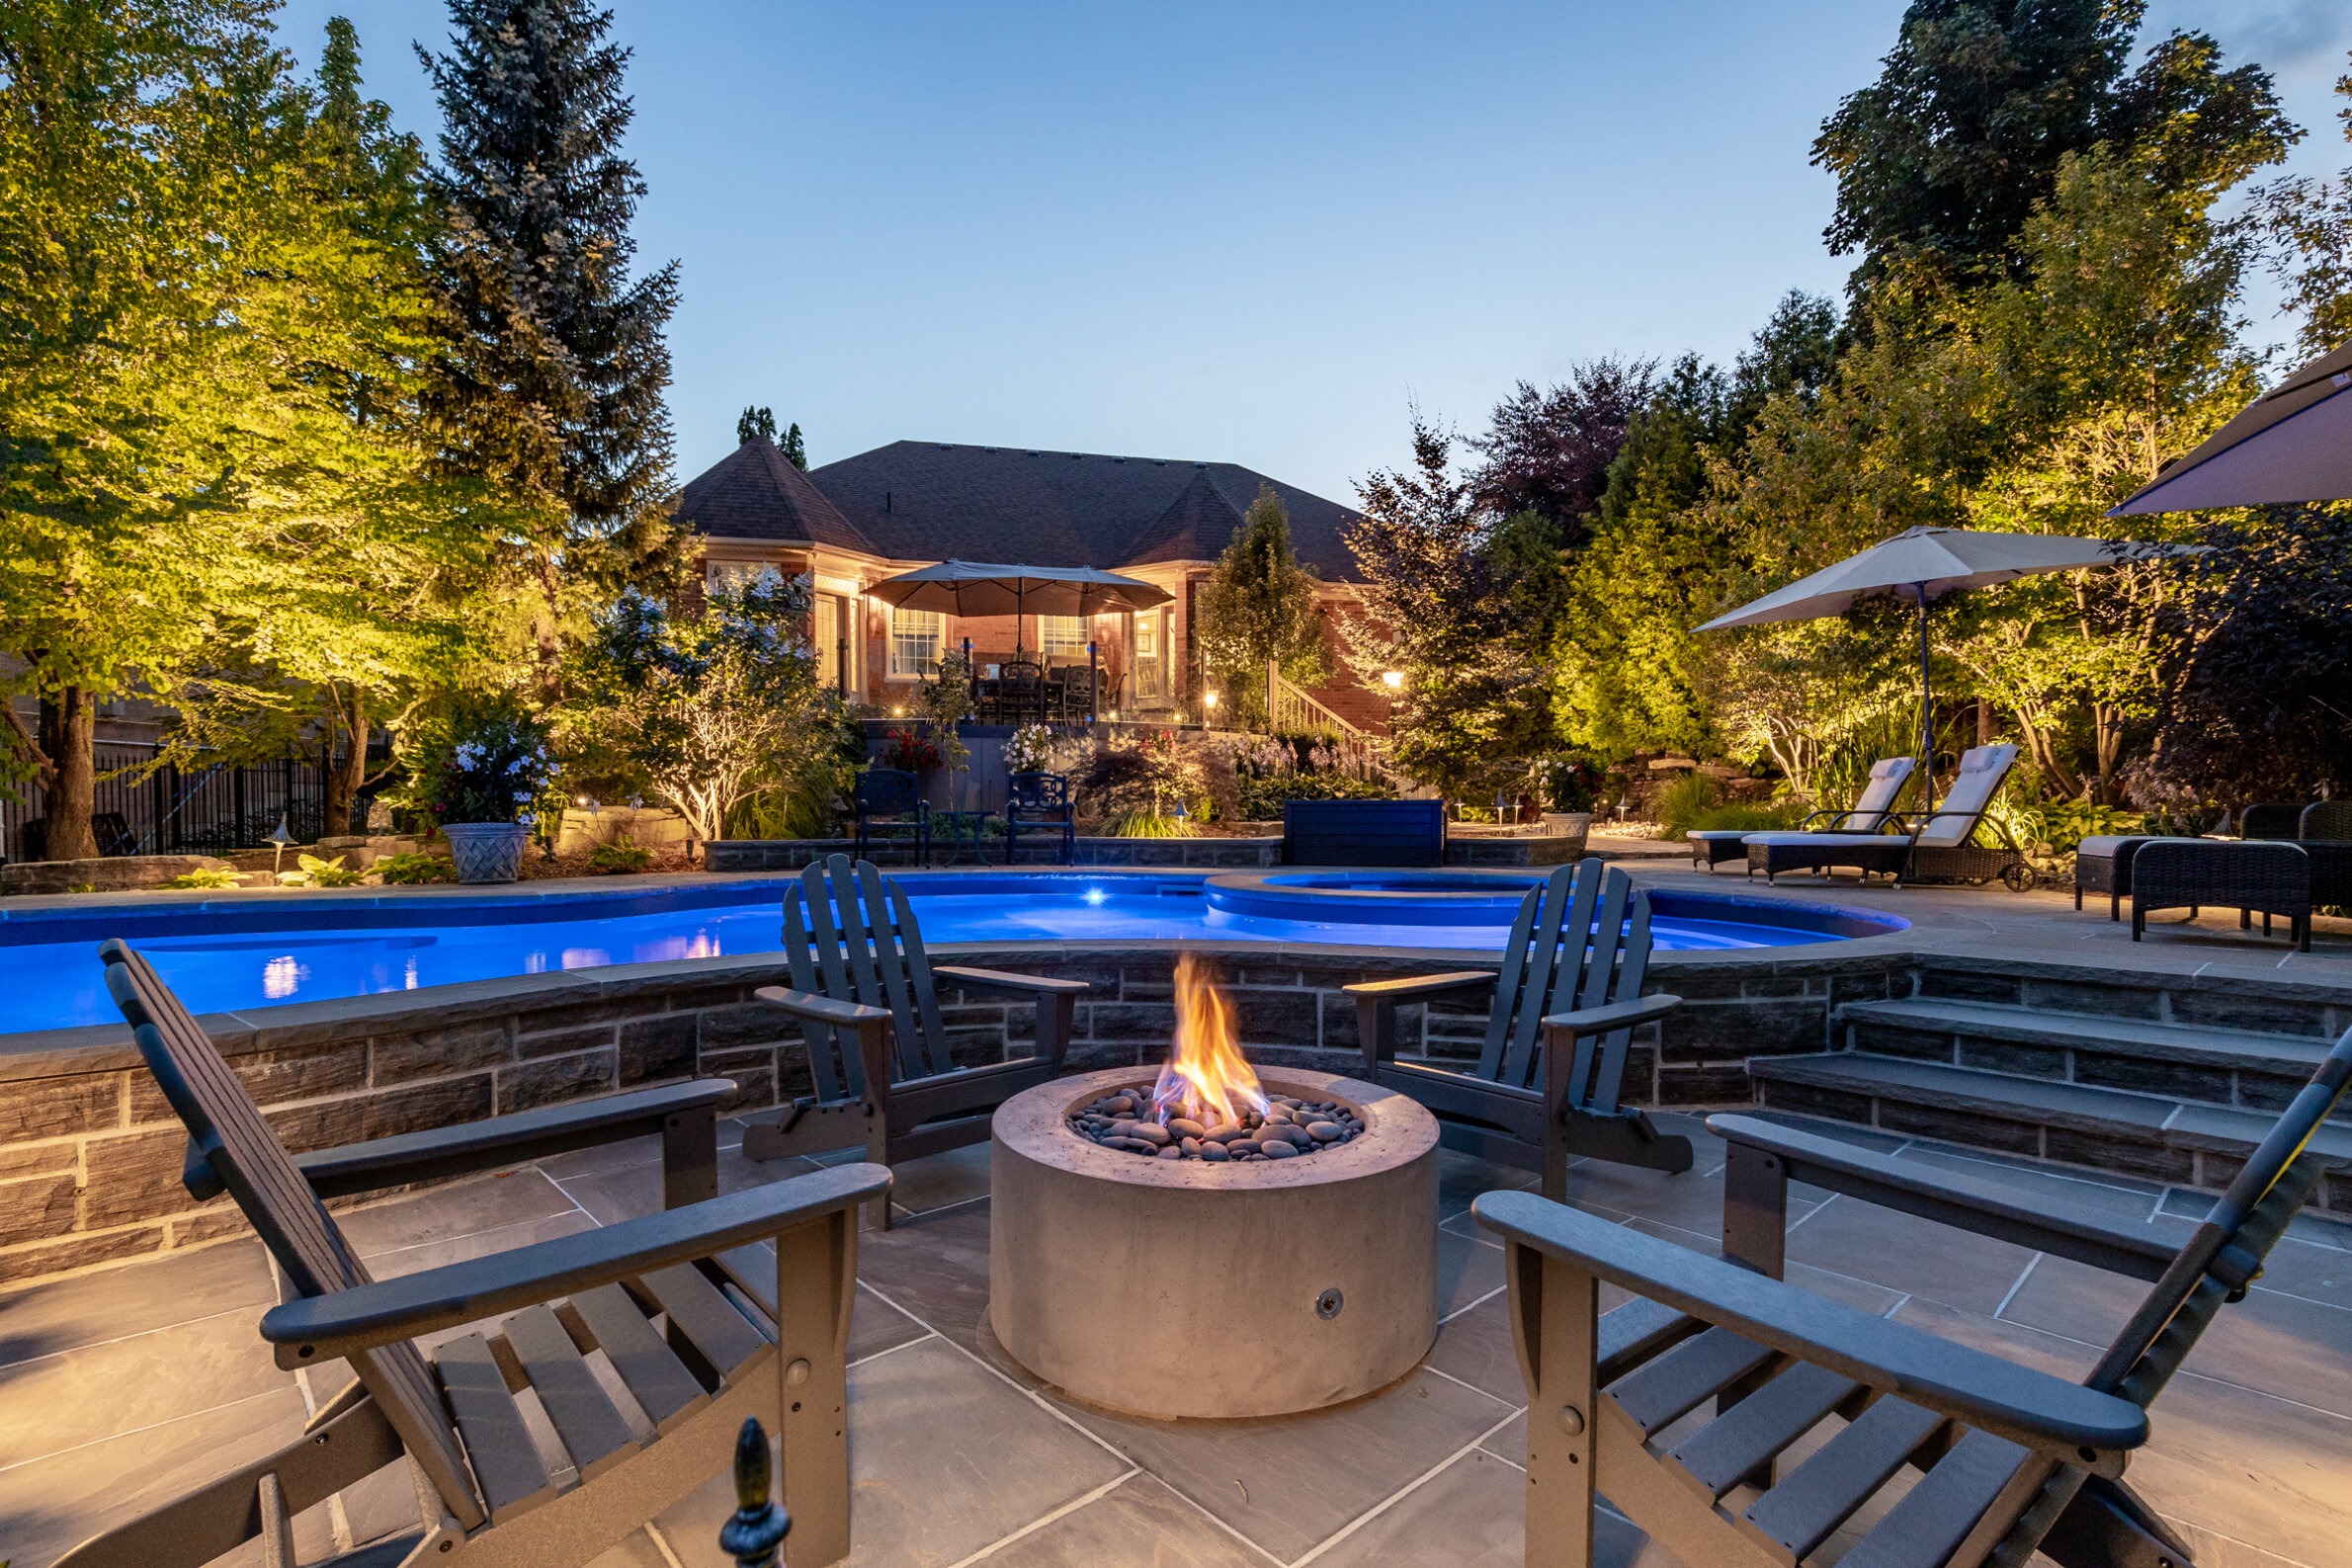 A luxurious backyard at dusk with a lit swimming pool, fire pit, outdoor chairs, lush trees, and a house in the background.